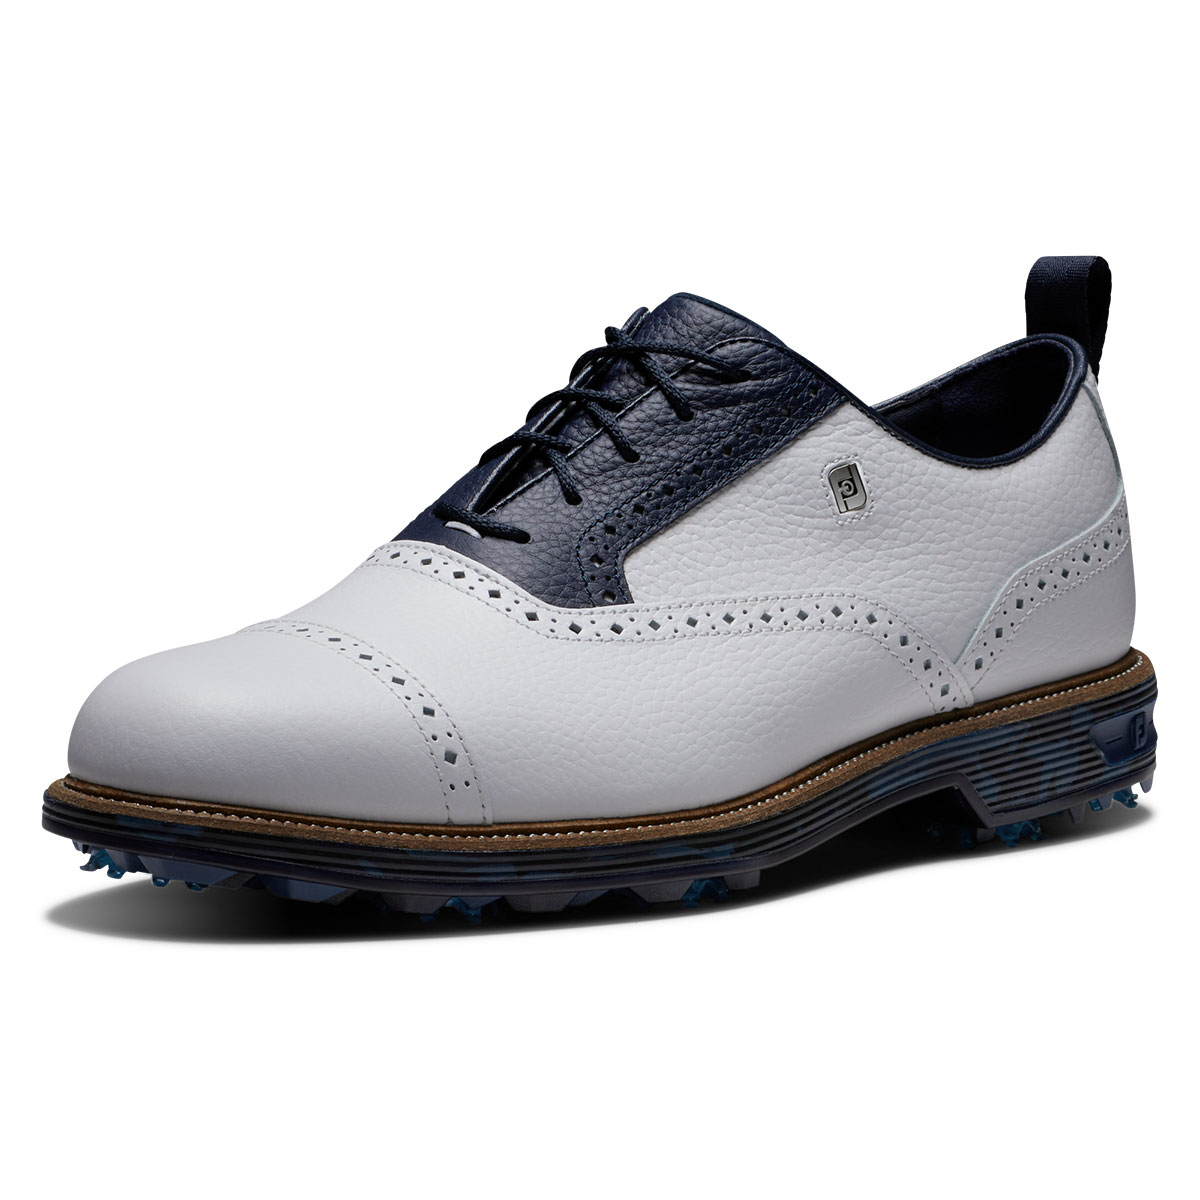 FootJoy Men's Todd Snyder Tarlow Shoes from american golf